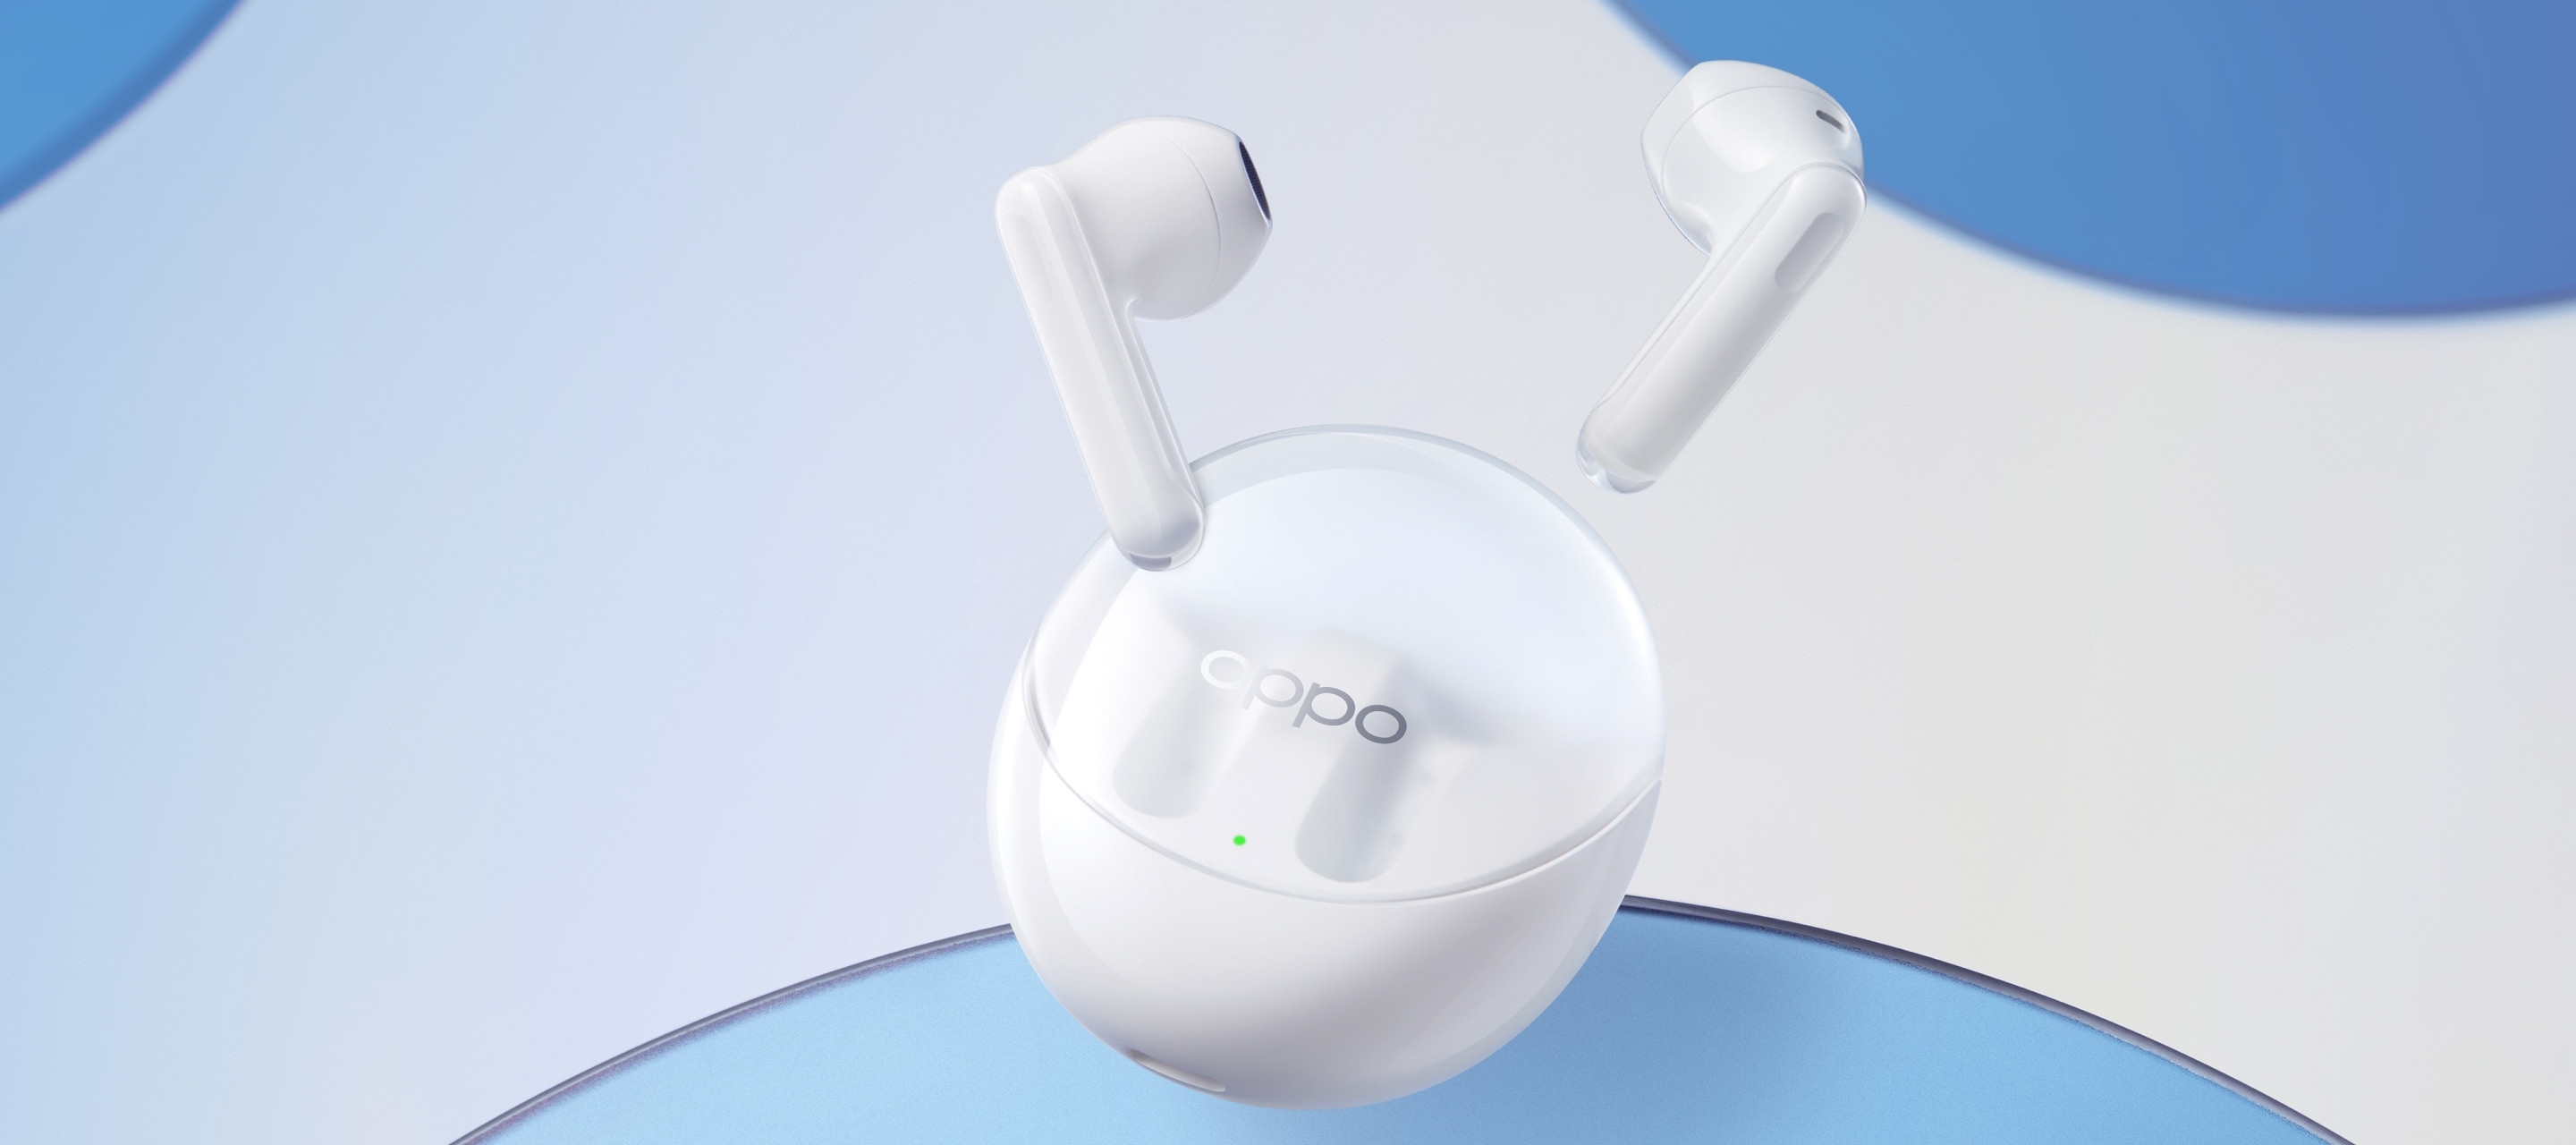 Oppo Enco Air3 true wireless earbuds launched in India: Price, competition  and more - Times of India